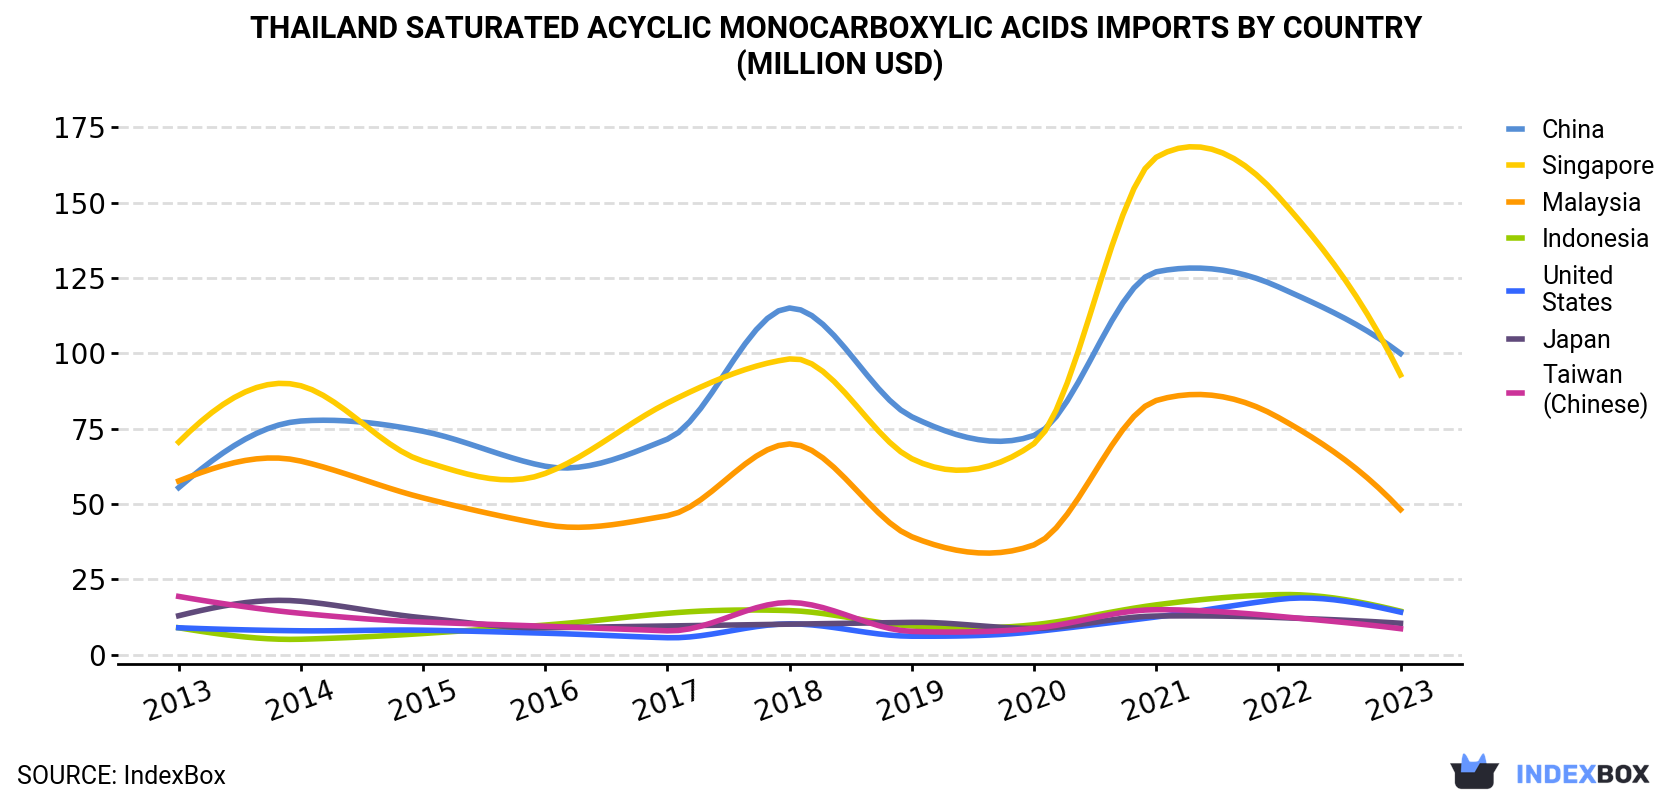 Thailand Saturated Acyclic Monocarboxylic Acids Imports By Country (Million USD)